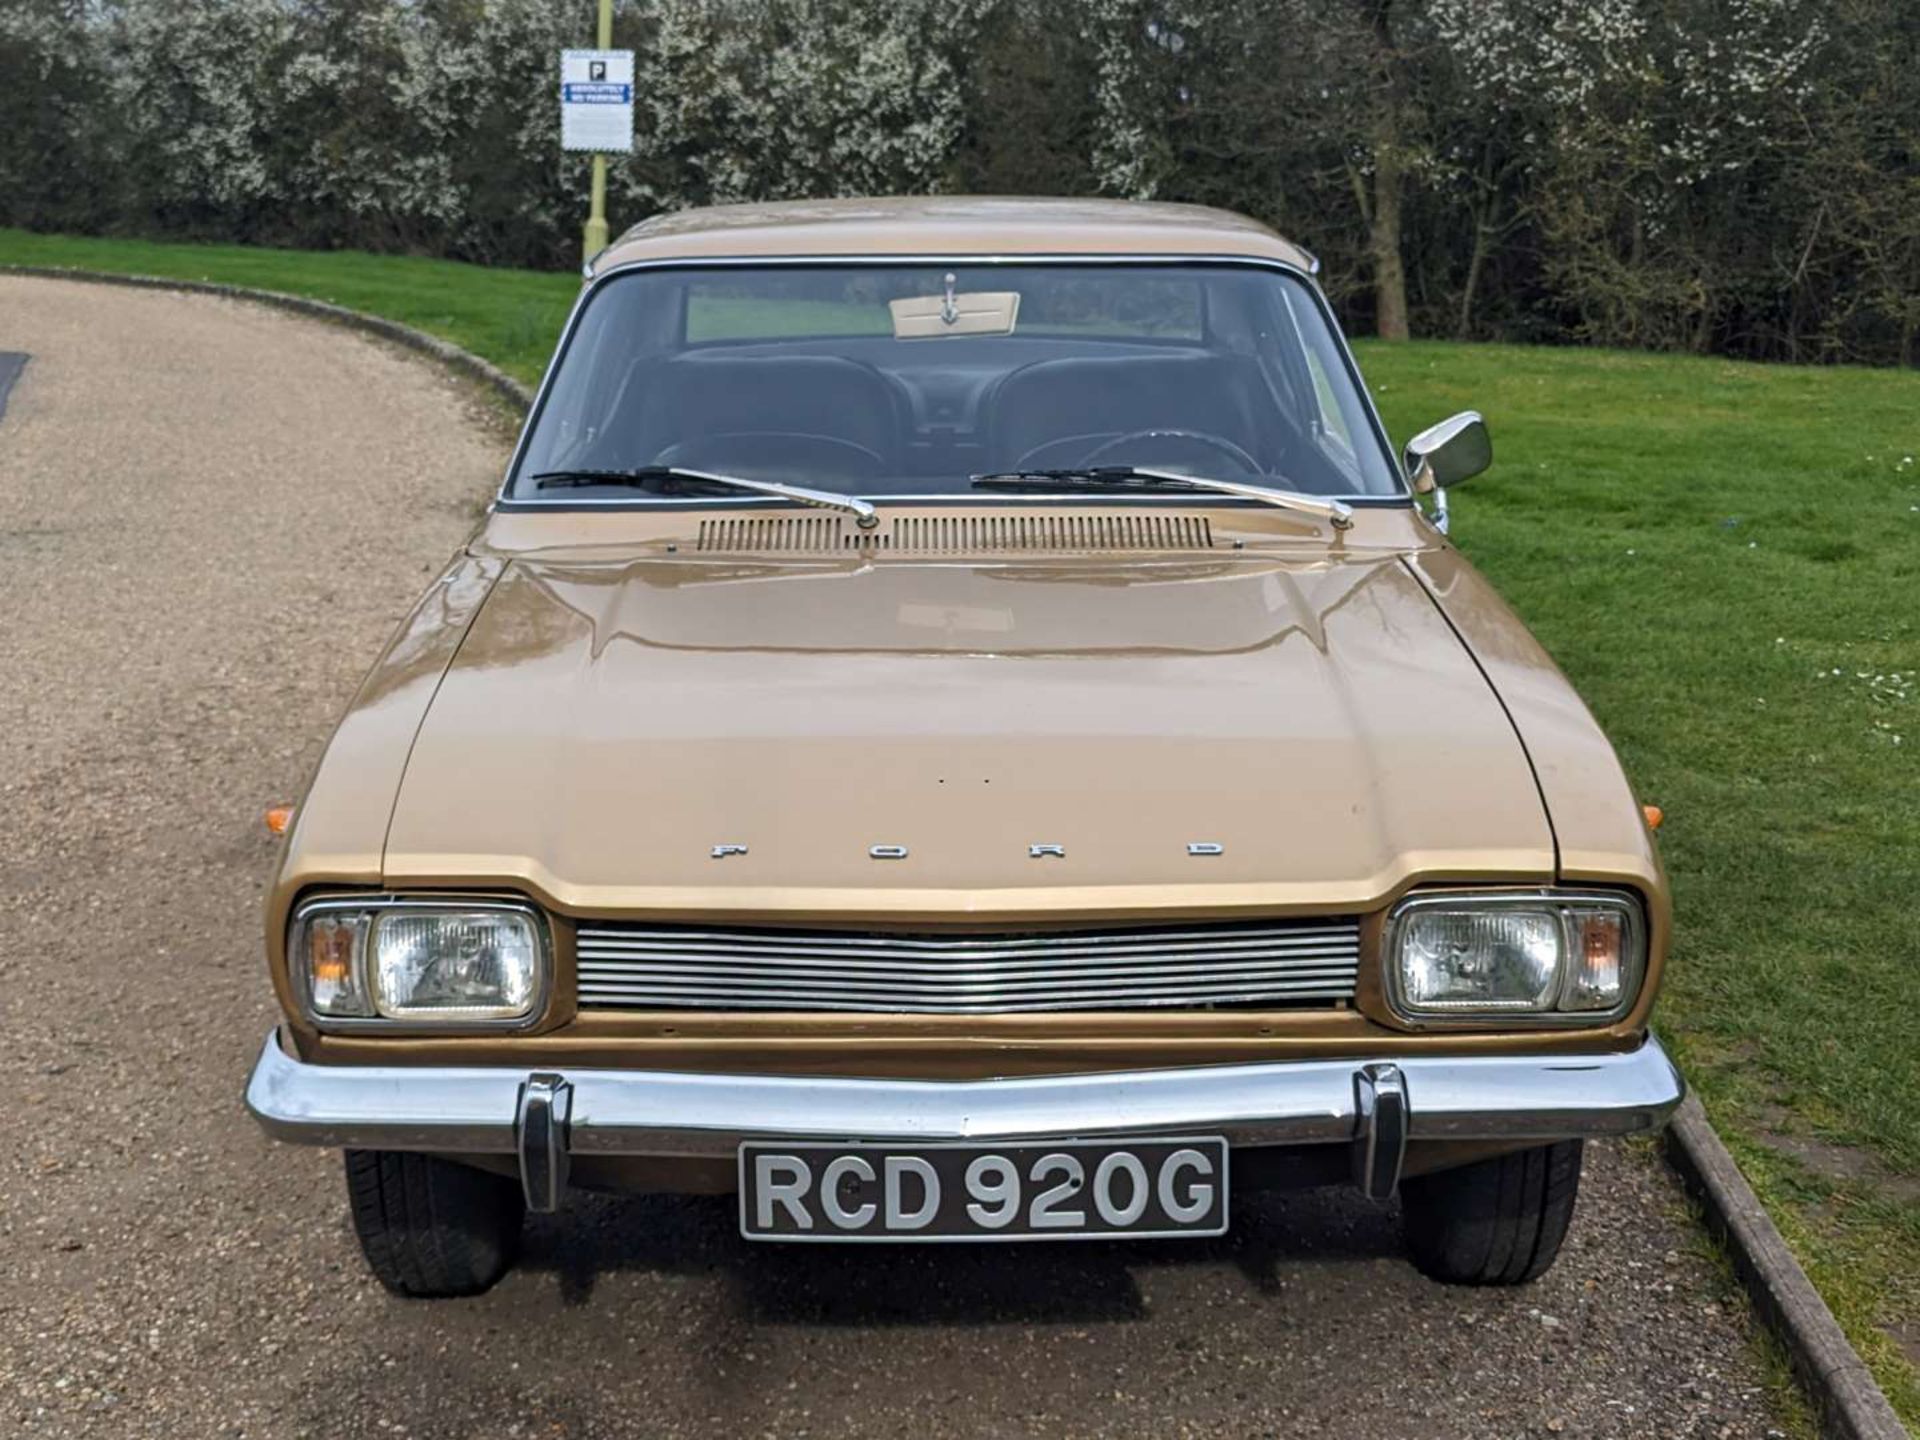 1969 FORD CAPRI 1600 GT LHD - Image 2 of 26